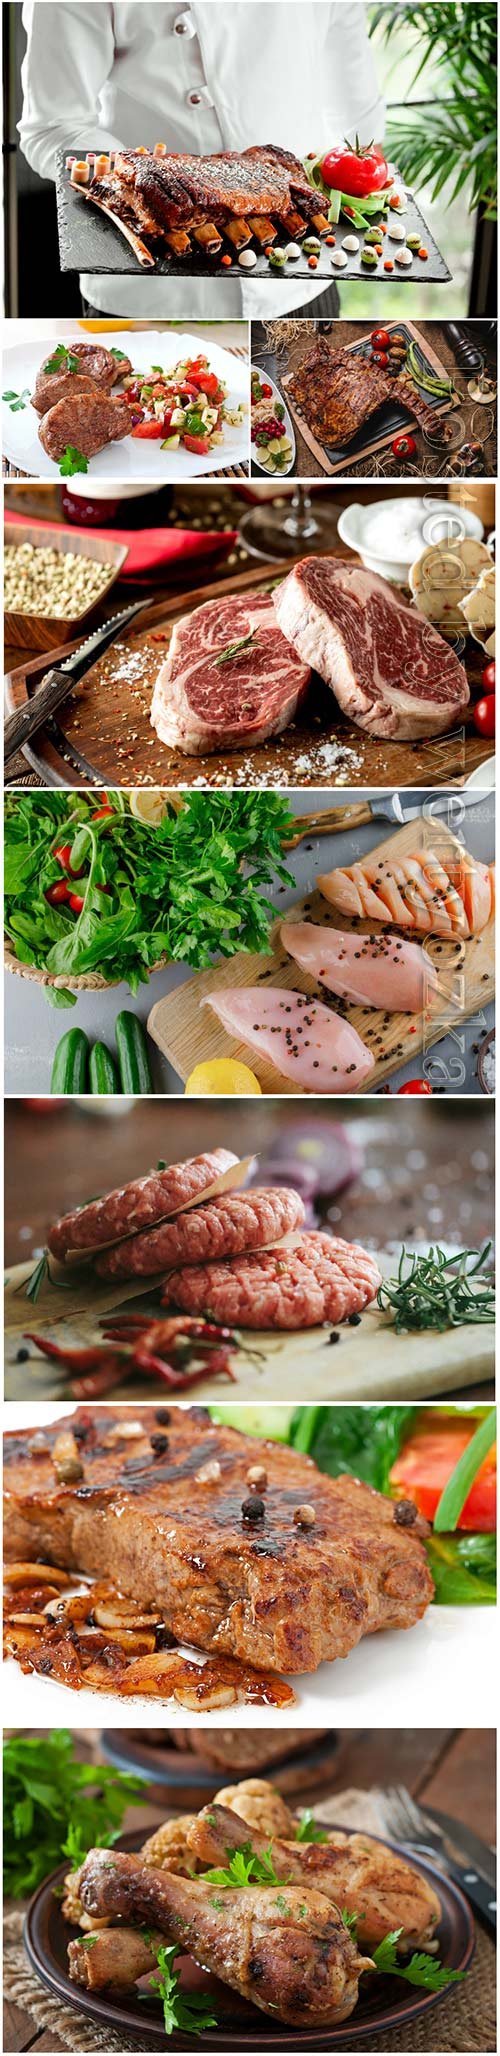 Delicious meat dishes stock photo